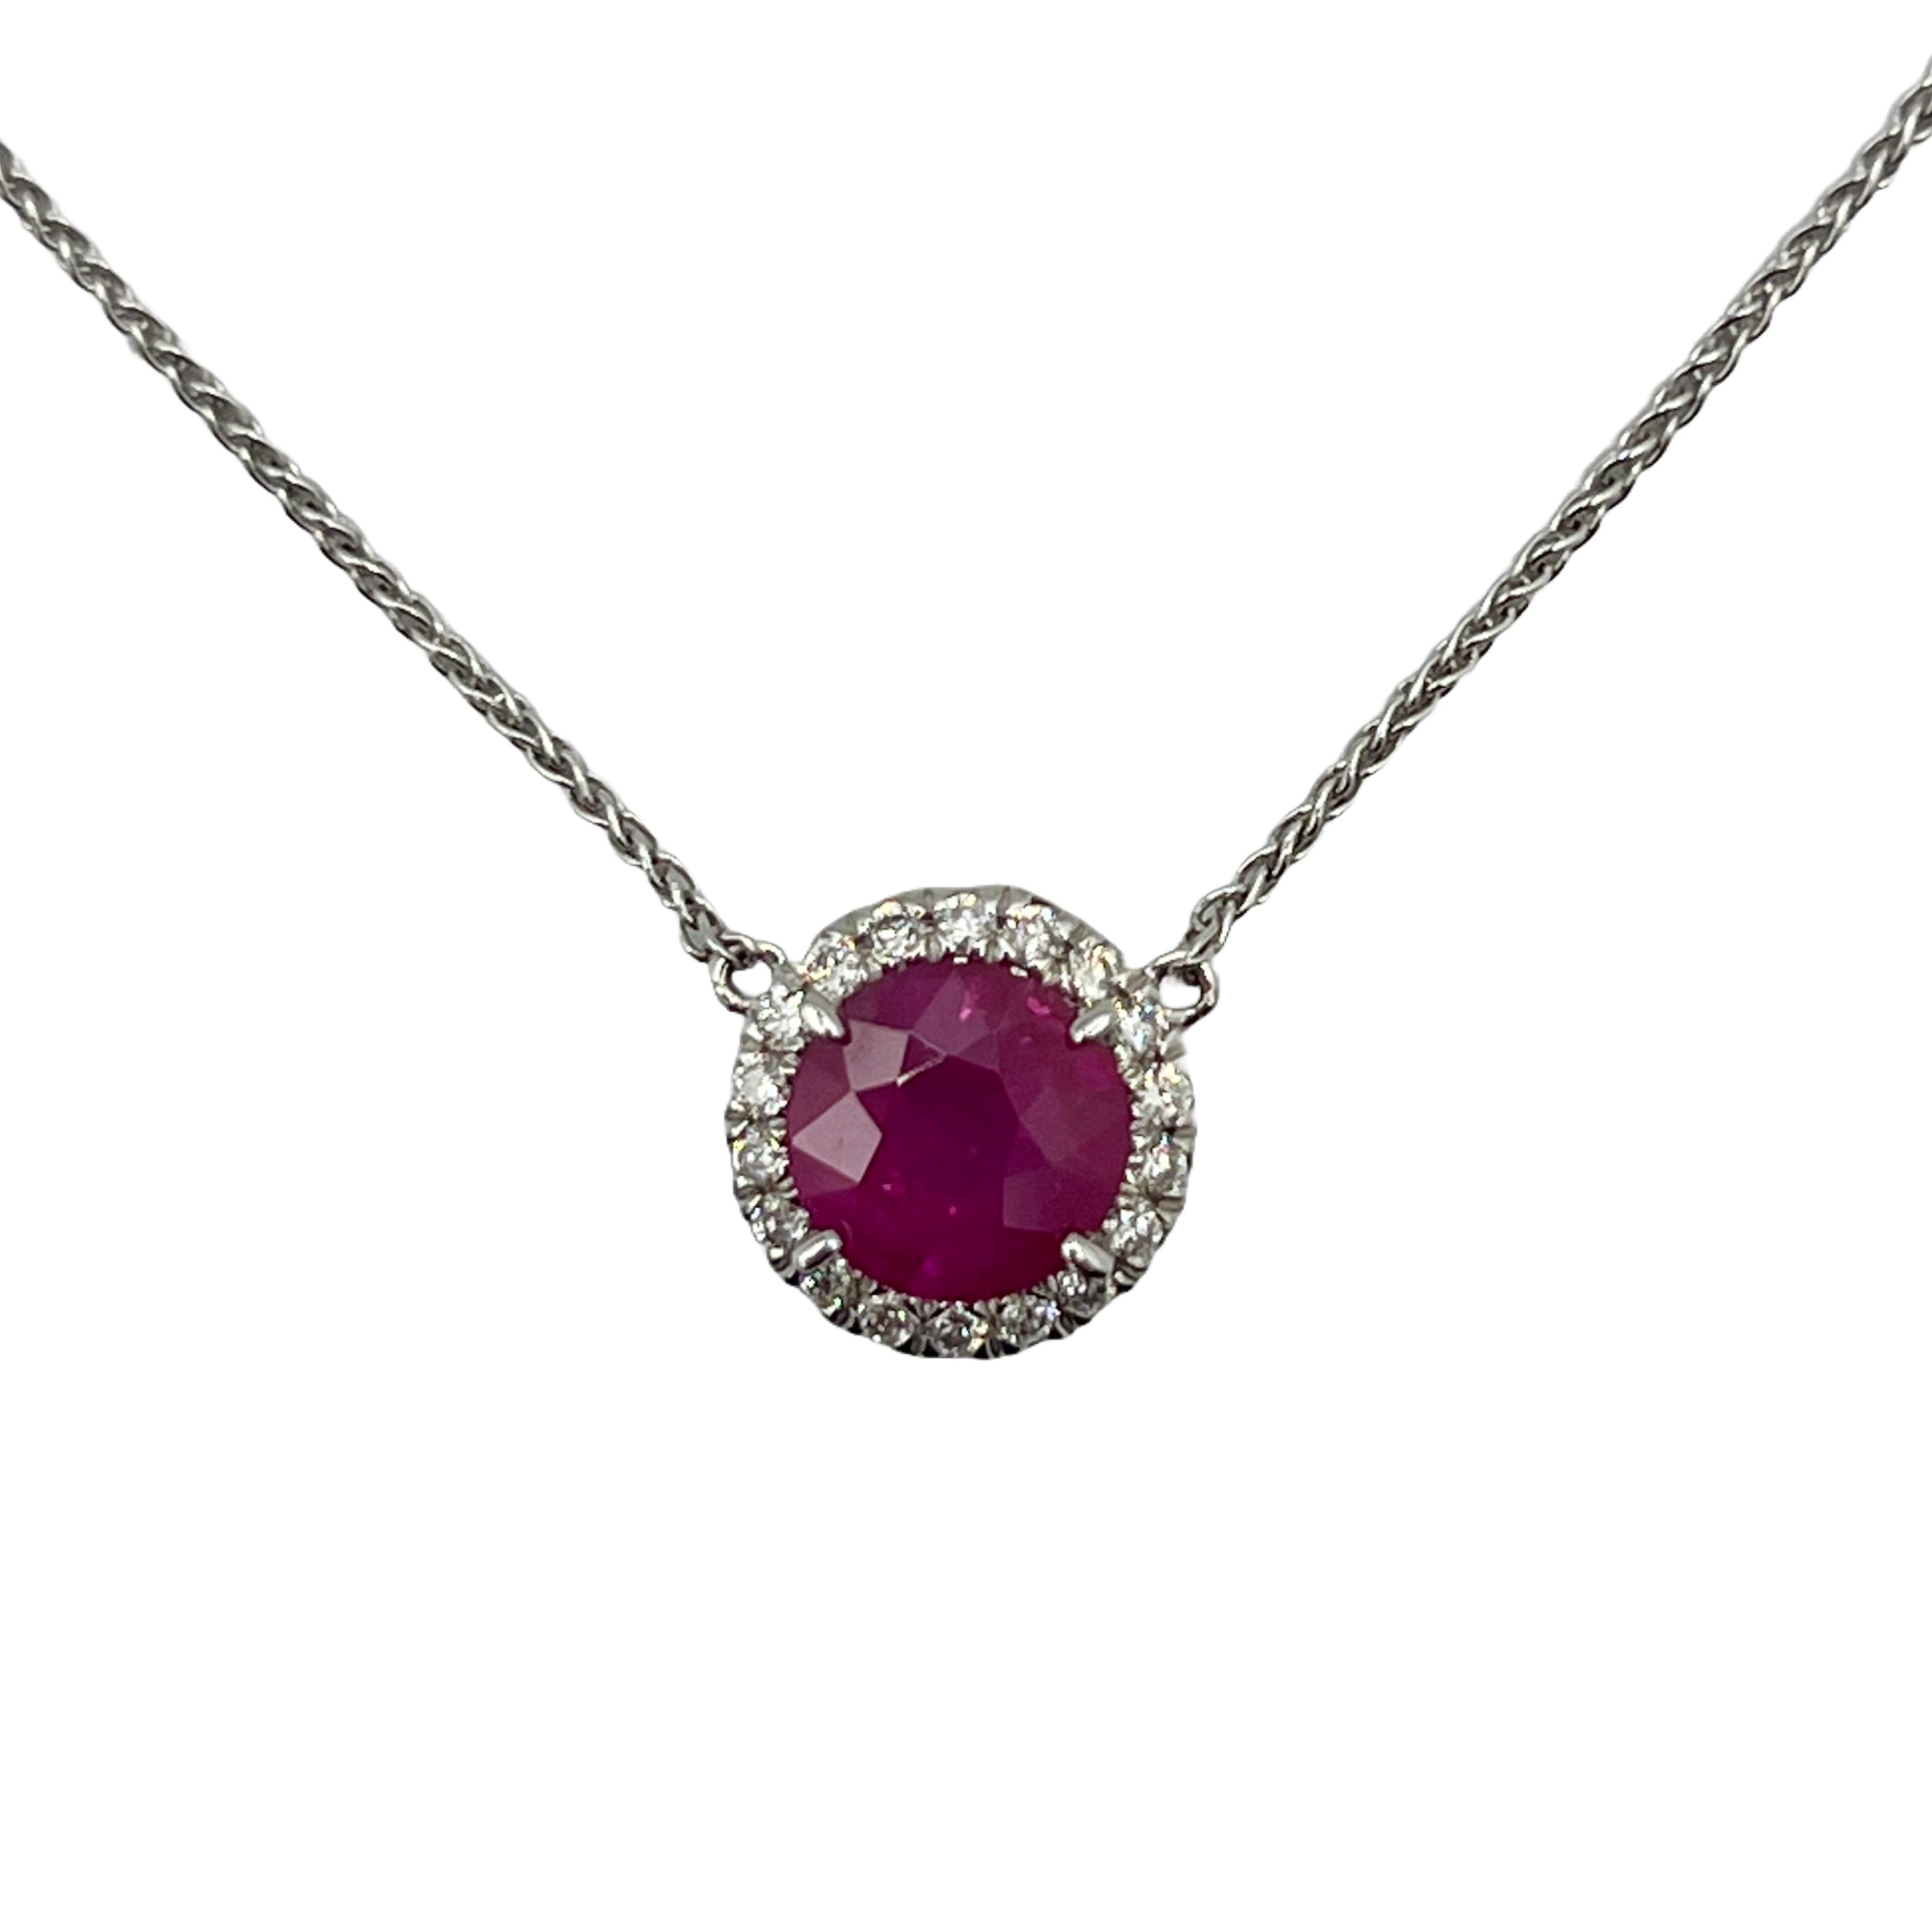 Pendant 18KW/0.9G 1RUBY-1.64CR 18RD-0.19CT